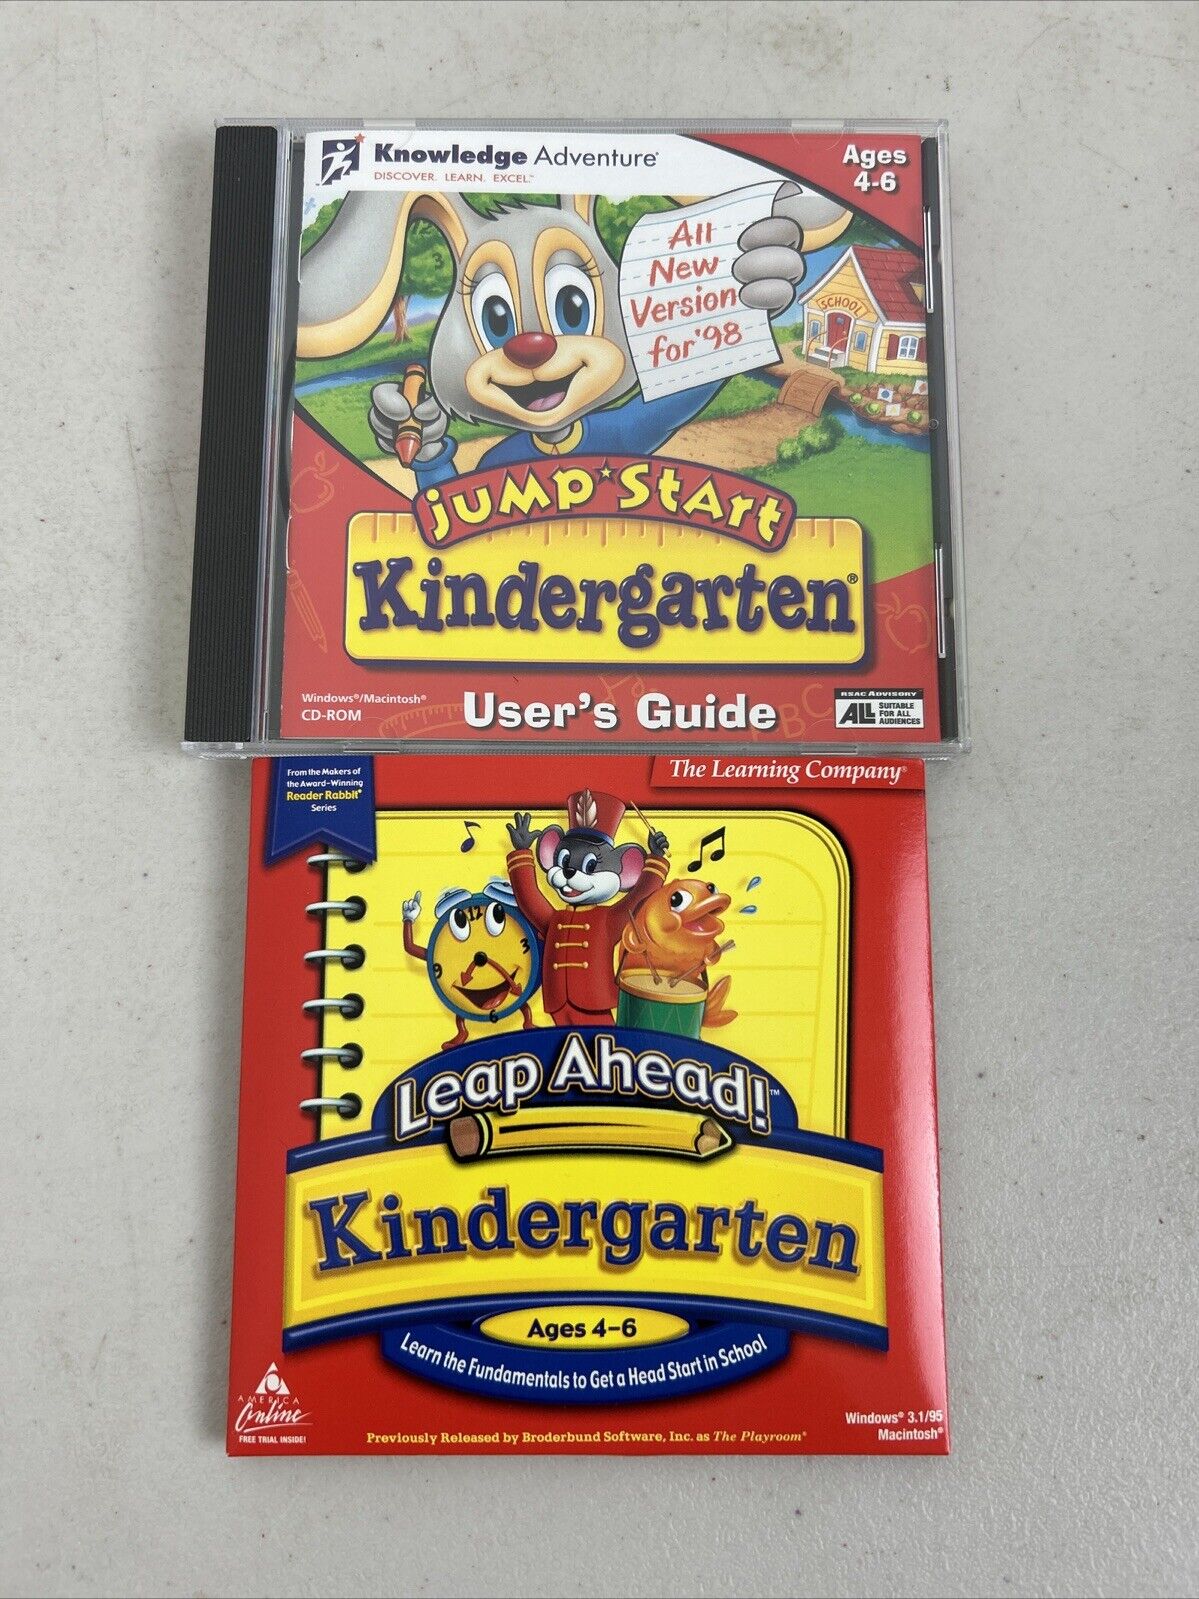 Knowledge Adventure JumpStart Kindergarten for PC Mac Users Guide Age 4-6